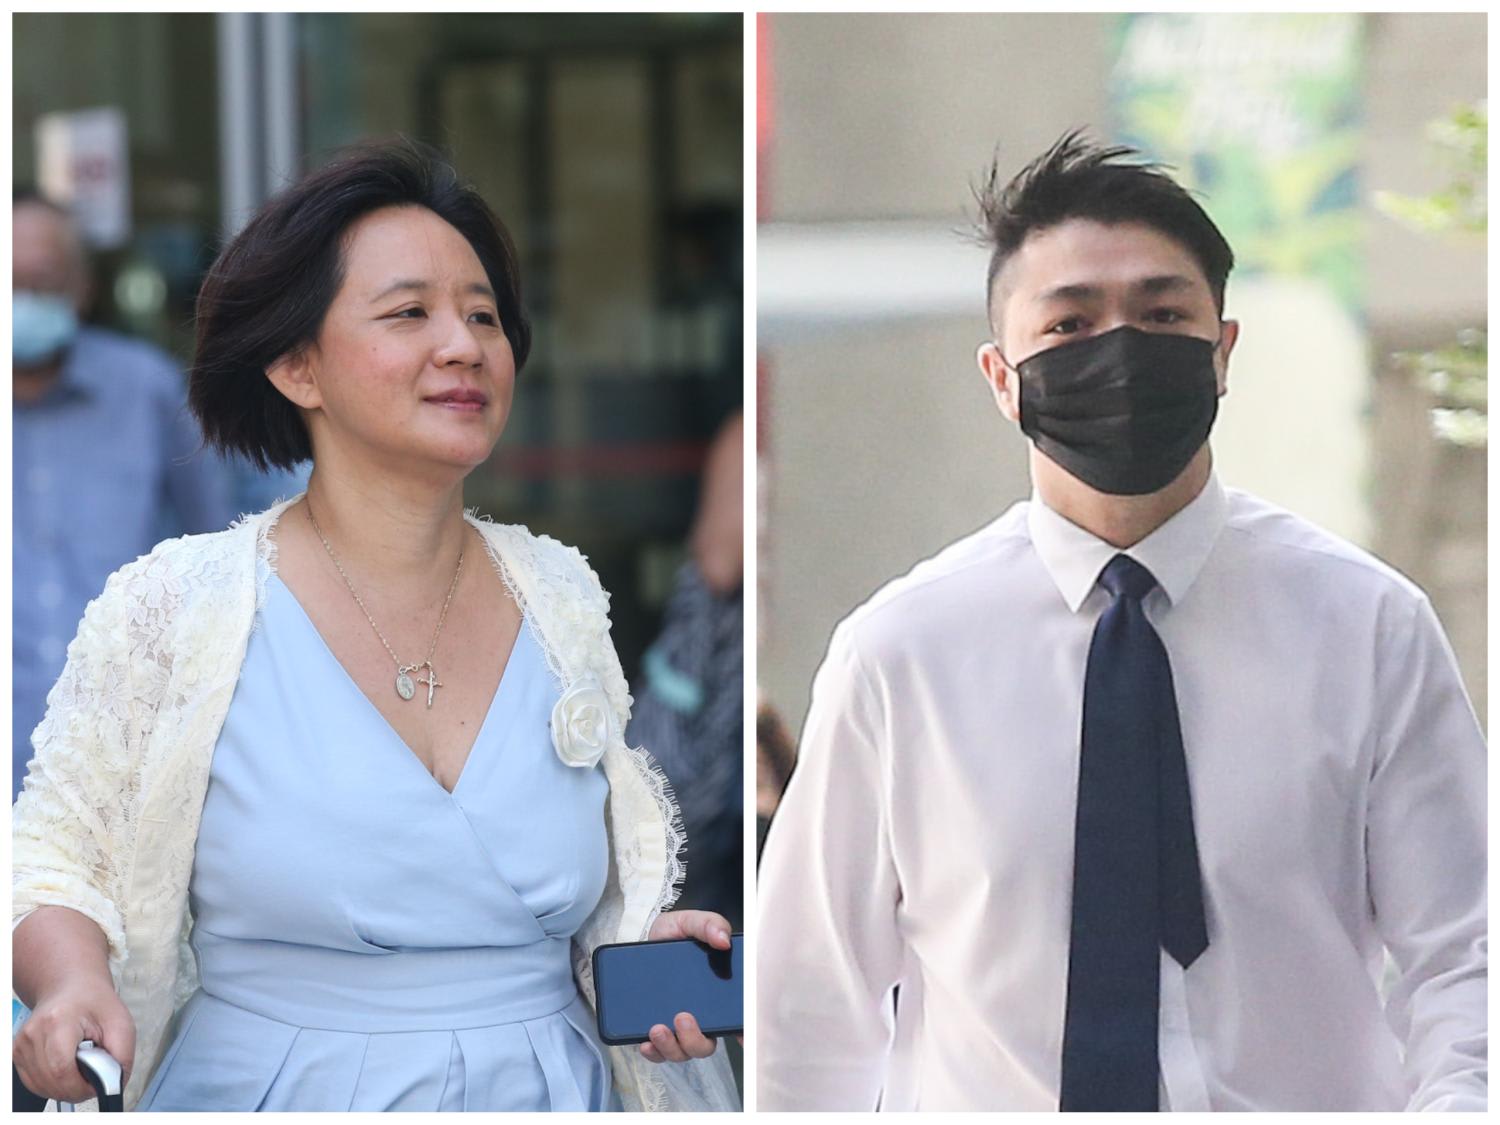 Iris Koh (left) and Jipson Quah at the State Courts on July 27, 2022.